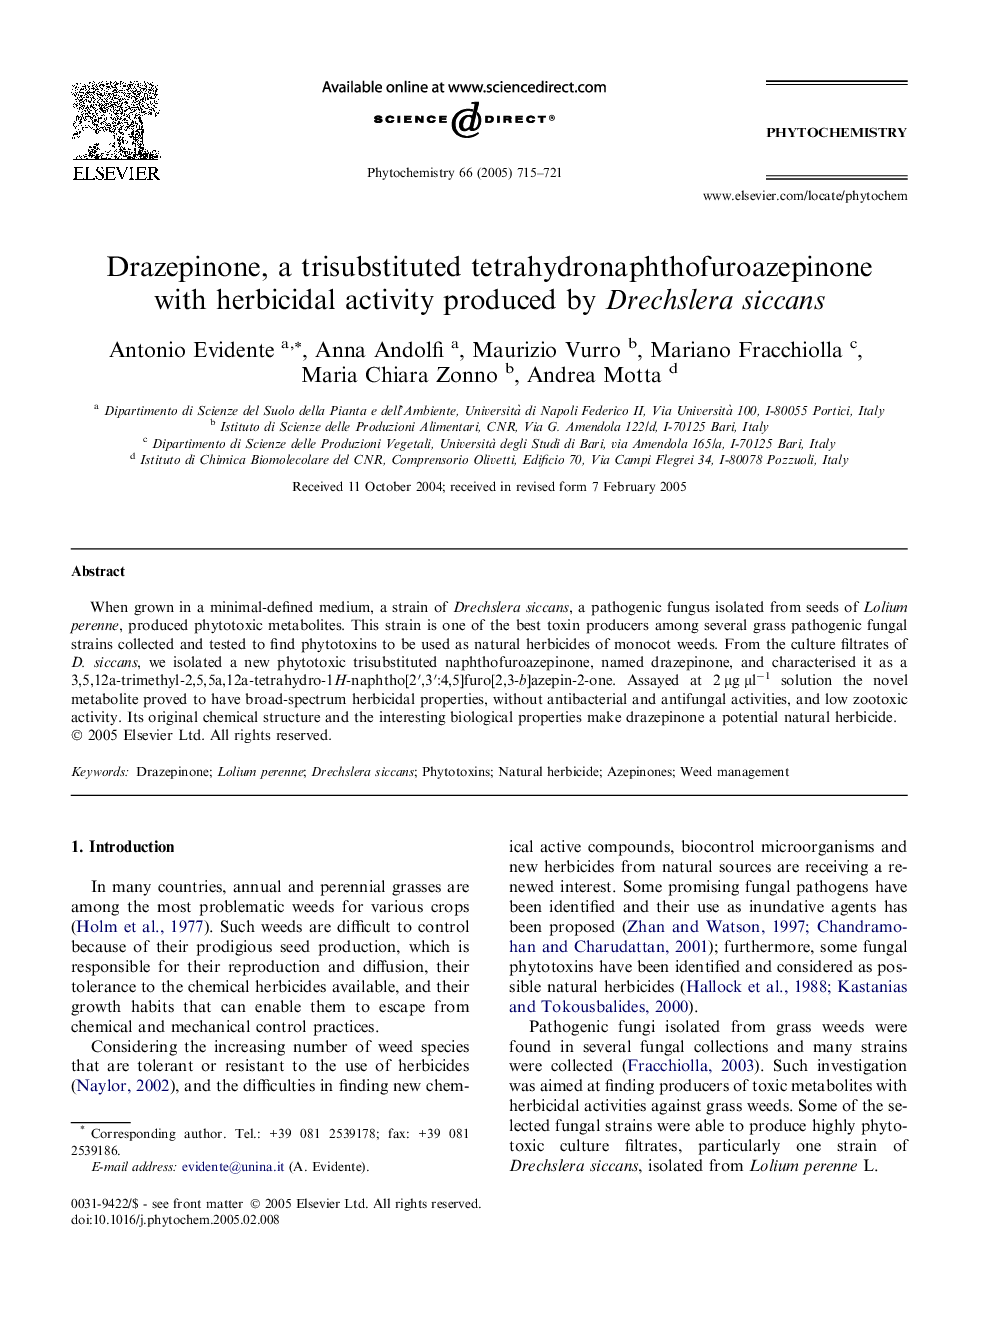 Drazepinone, a trisubstituted tetrahydronaphthofuroazepinone with herbicidal activity produced by Drechslera siccans